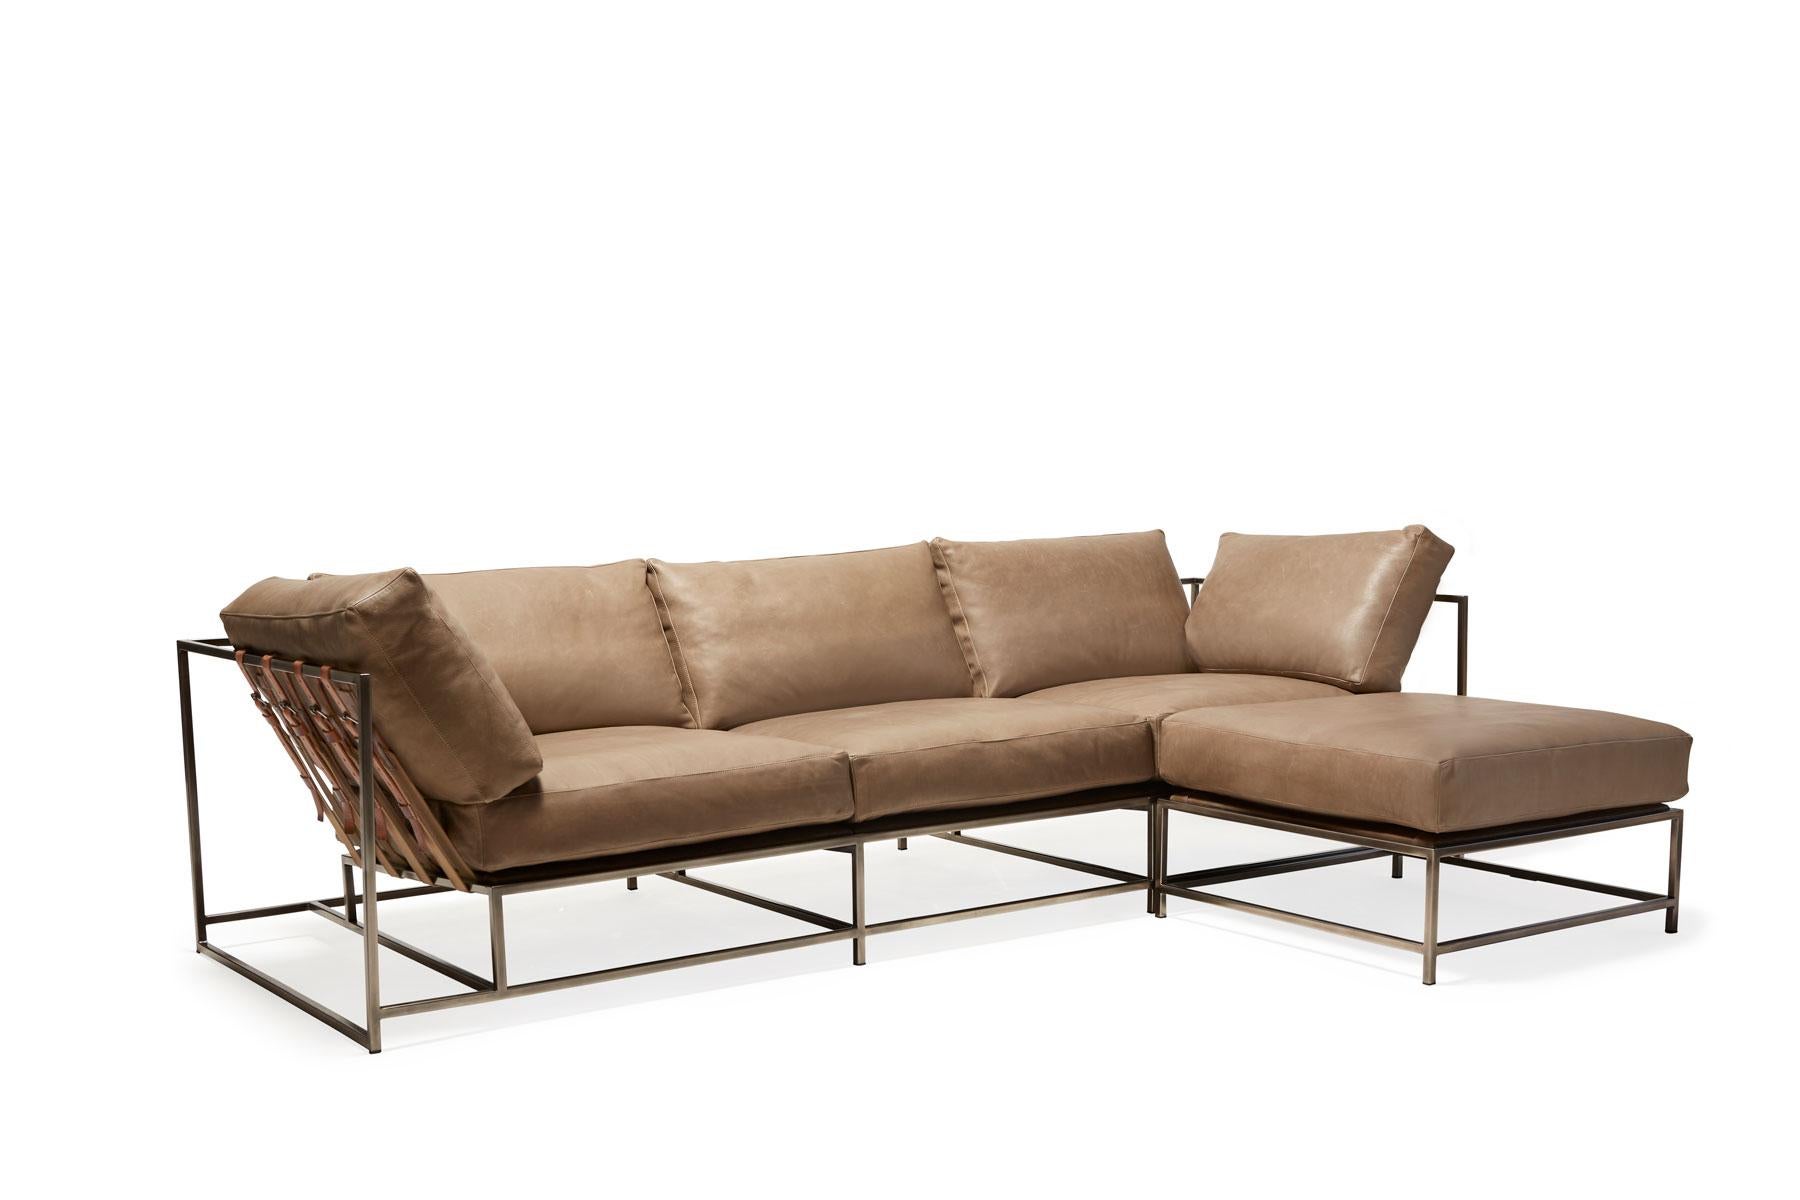 Metalwork Pebbled Taupe Leather & Antique Nickel Sofa For Sale